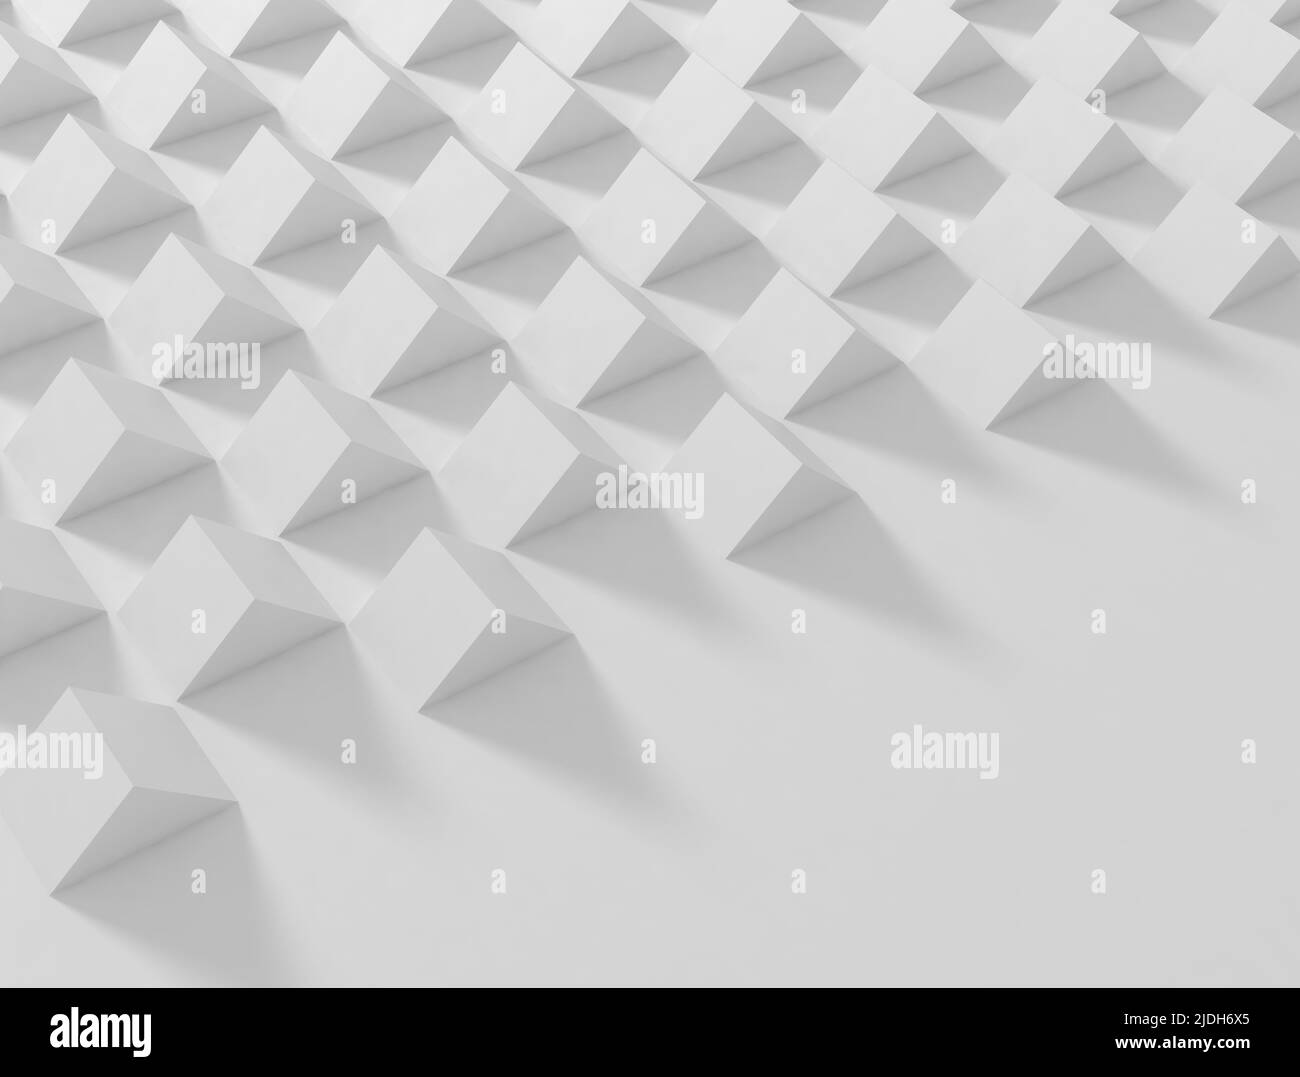 Abstract white 3d illustration triangles background Stock Photo